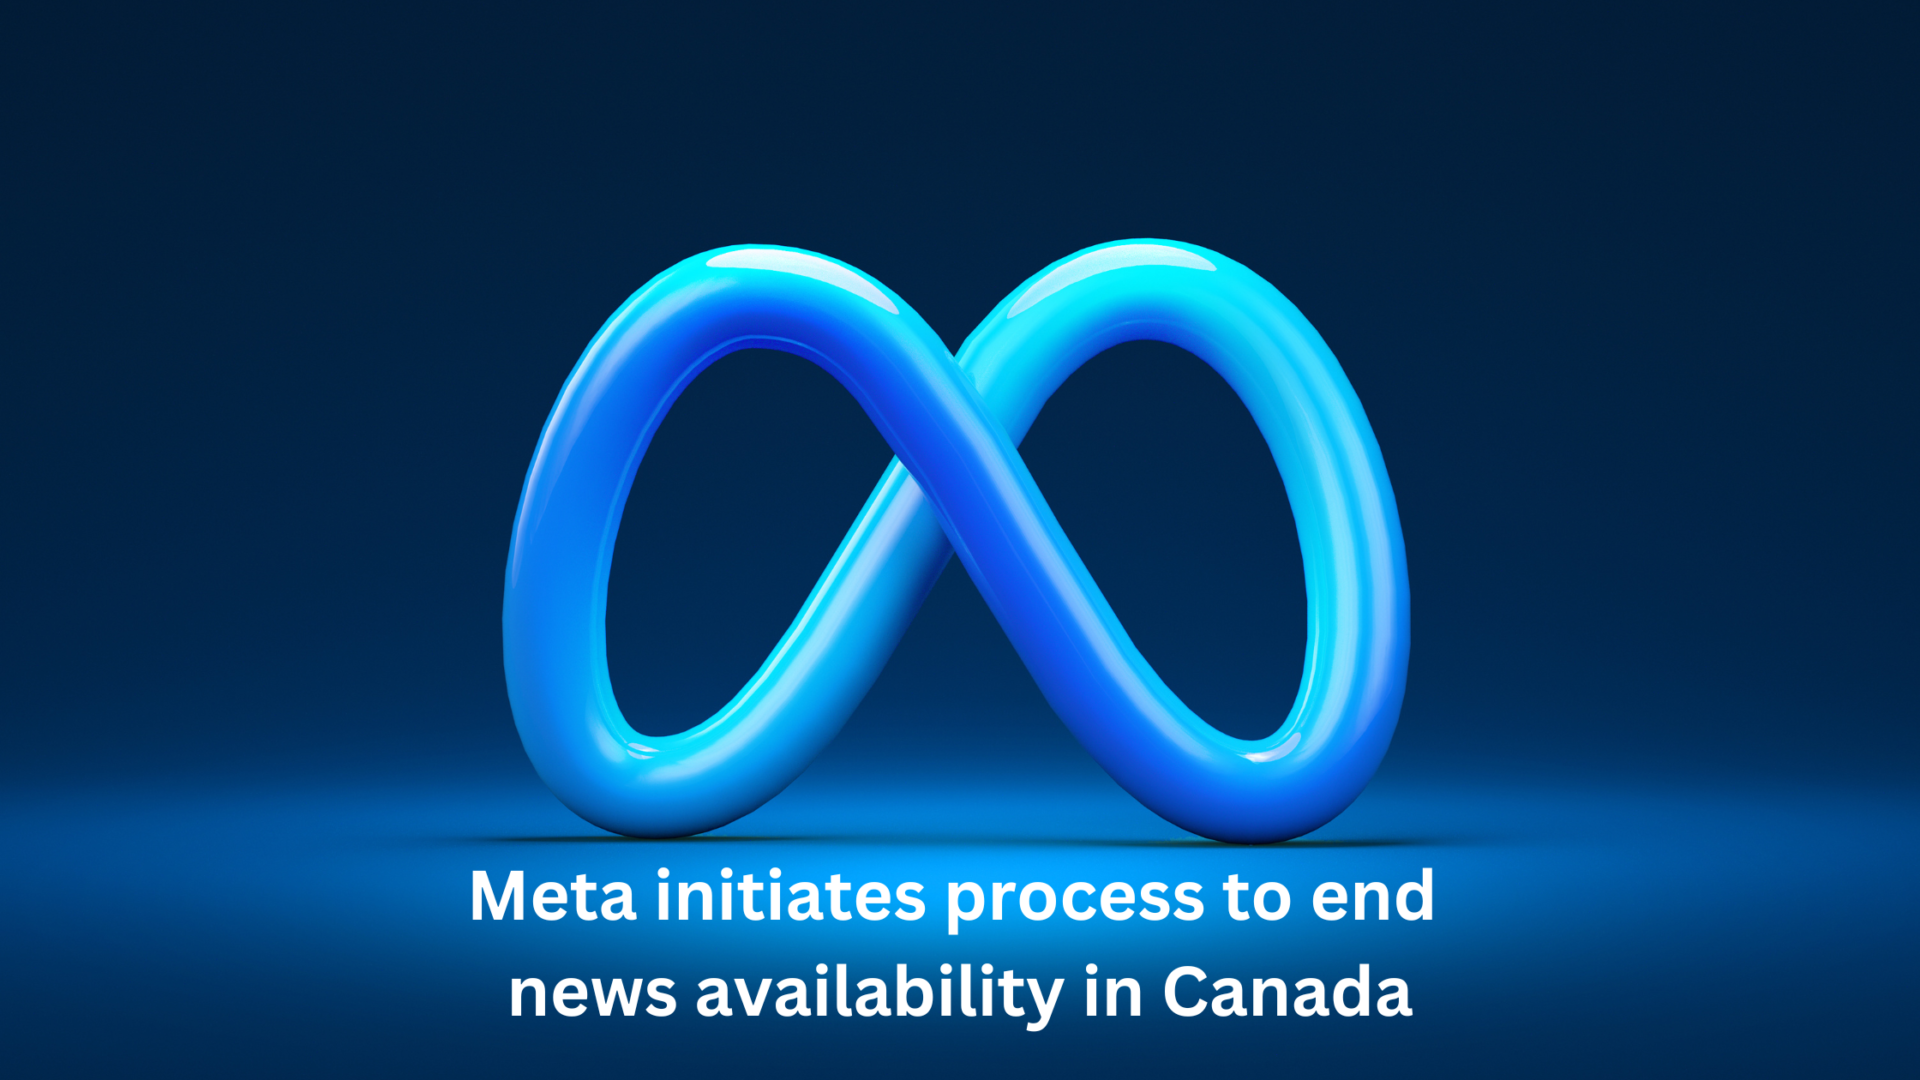 Meta initiates process to end news availability in Canada